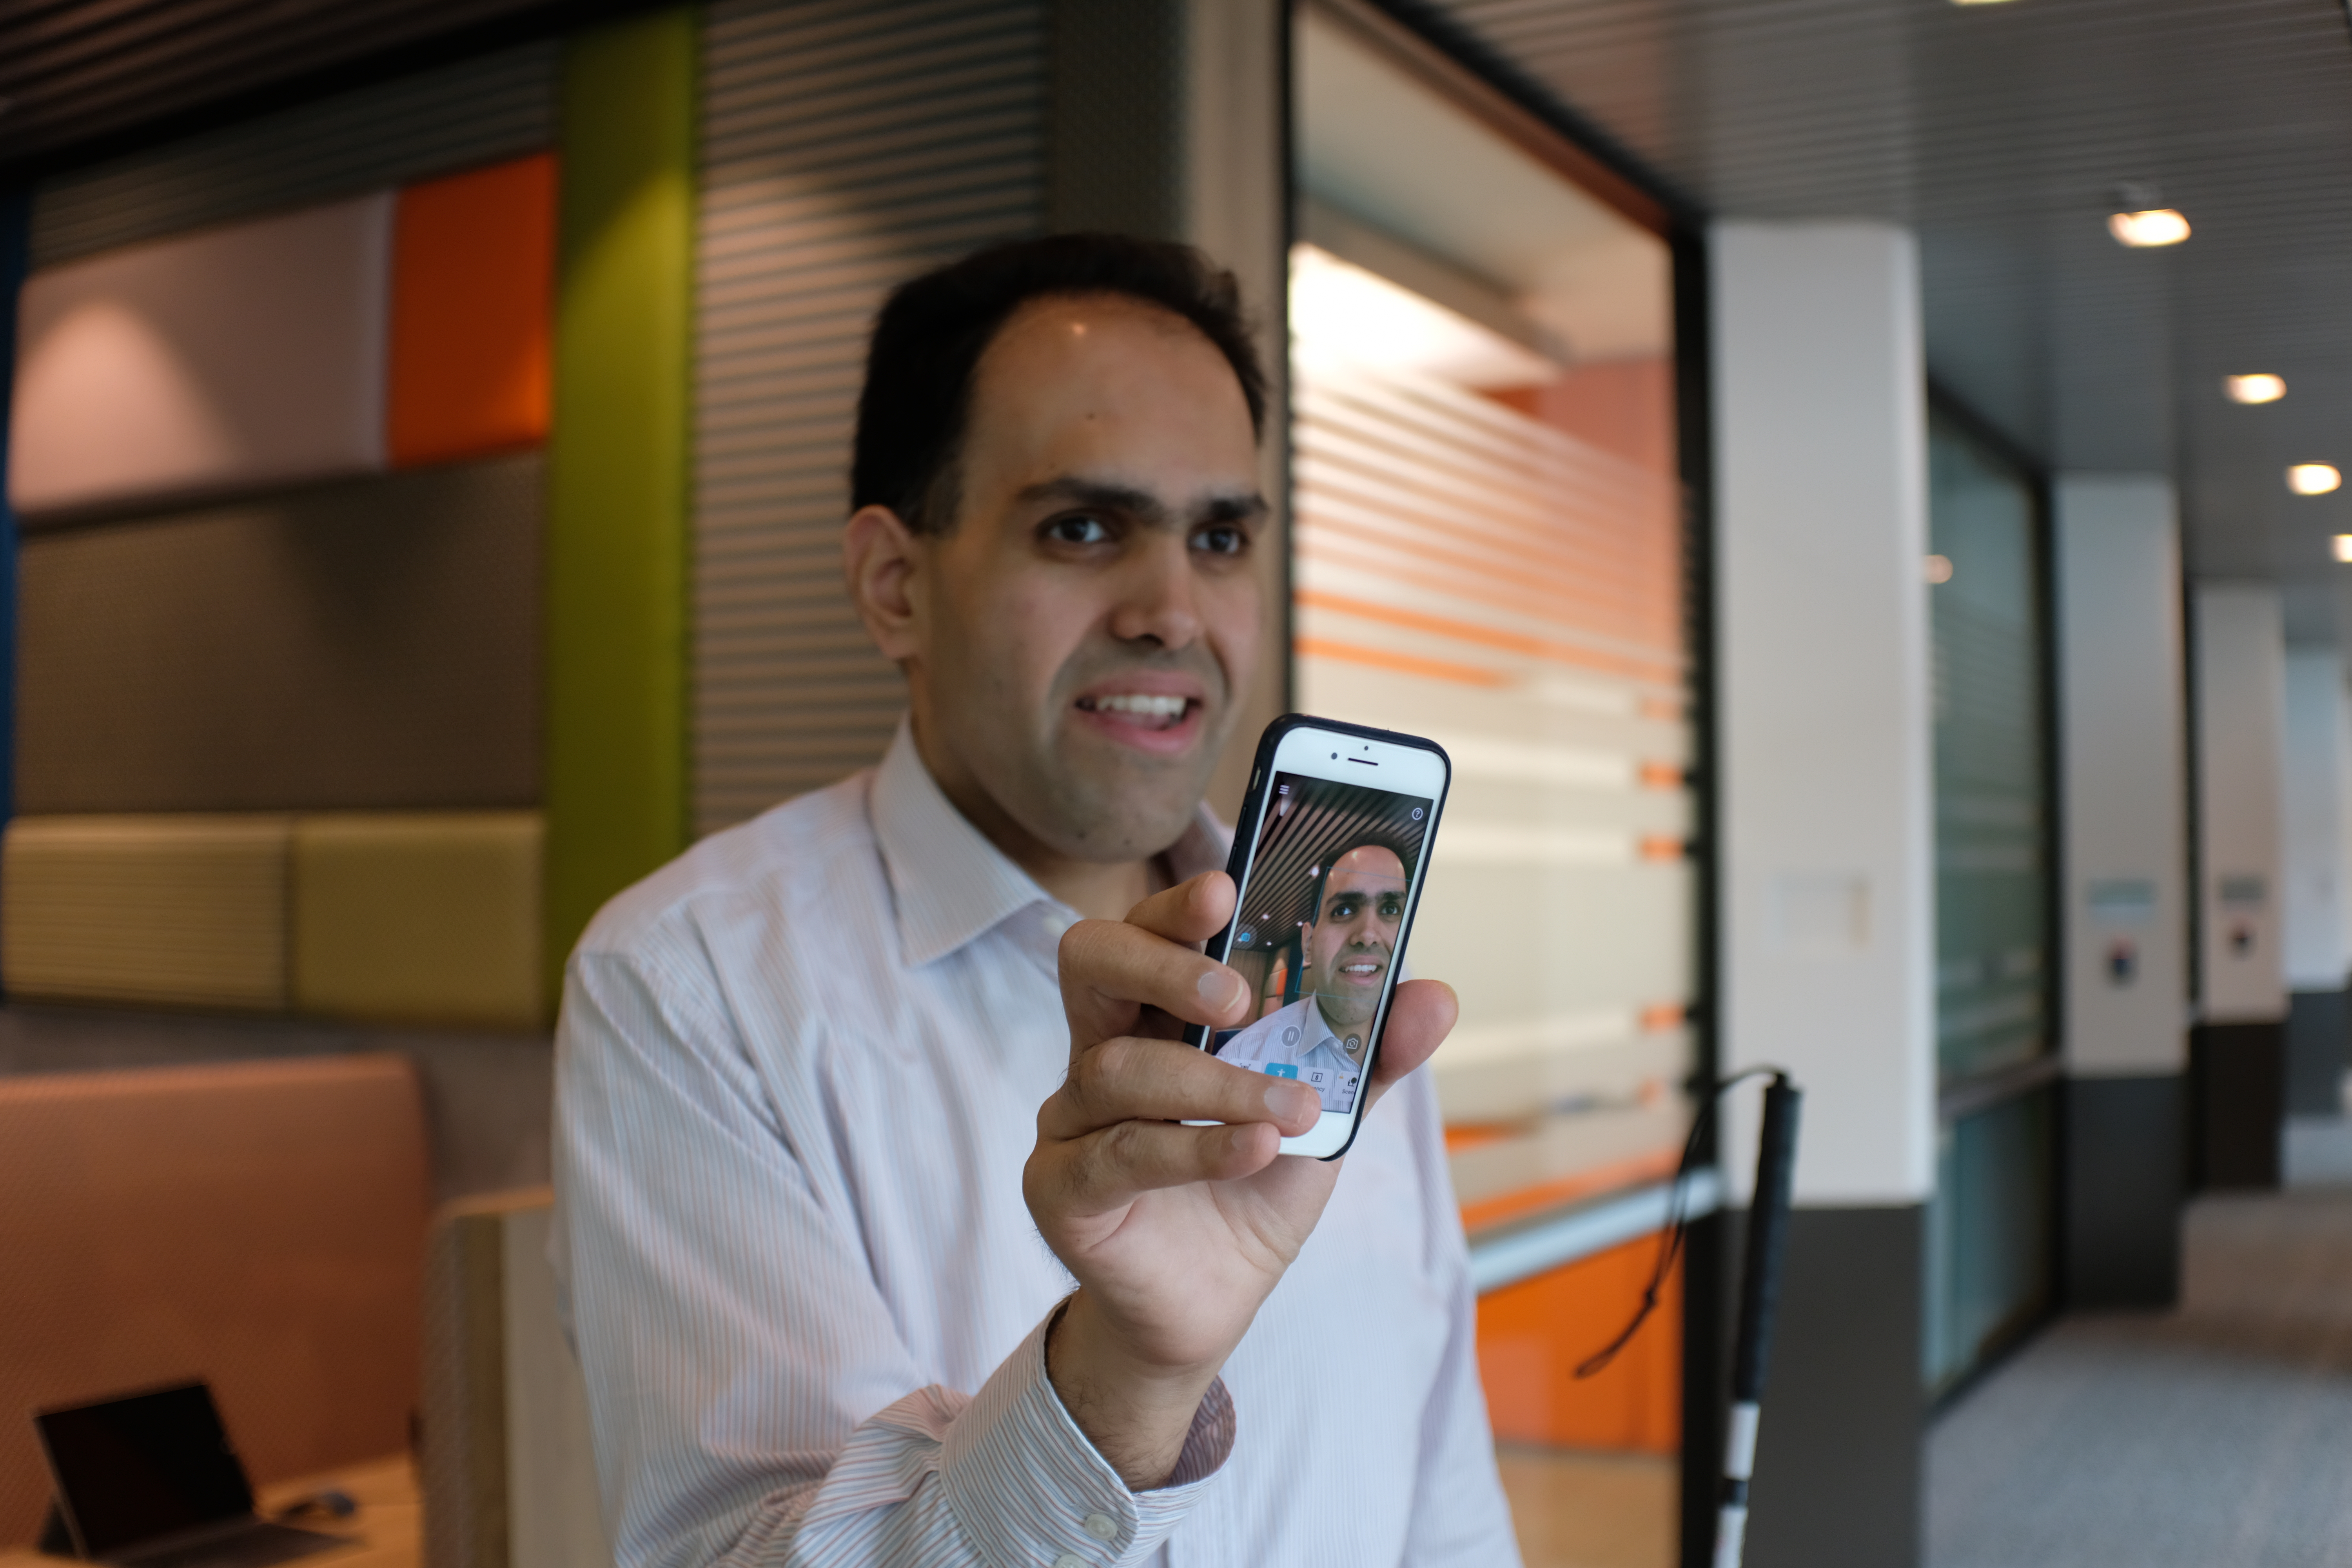 Saqib Shaikh demonstrates the Seeing AI app on his smartphone during a recent visit to Microsoft Asia’s headquarters in Singapore.